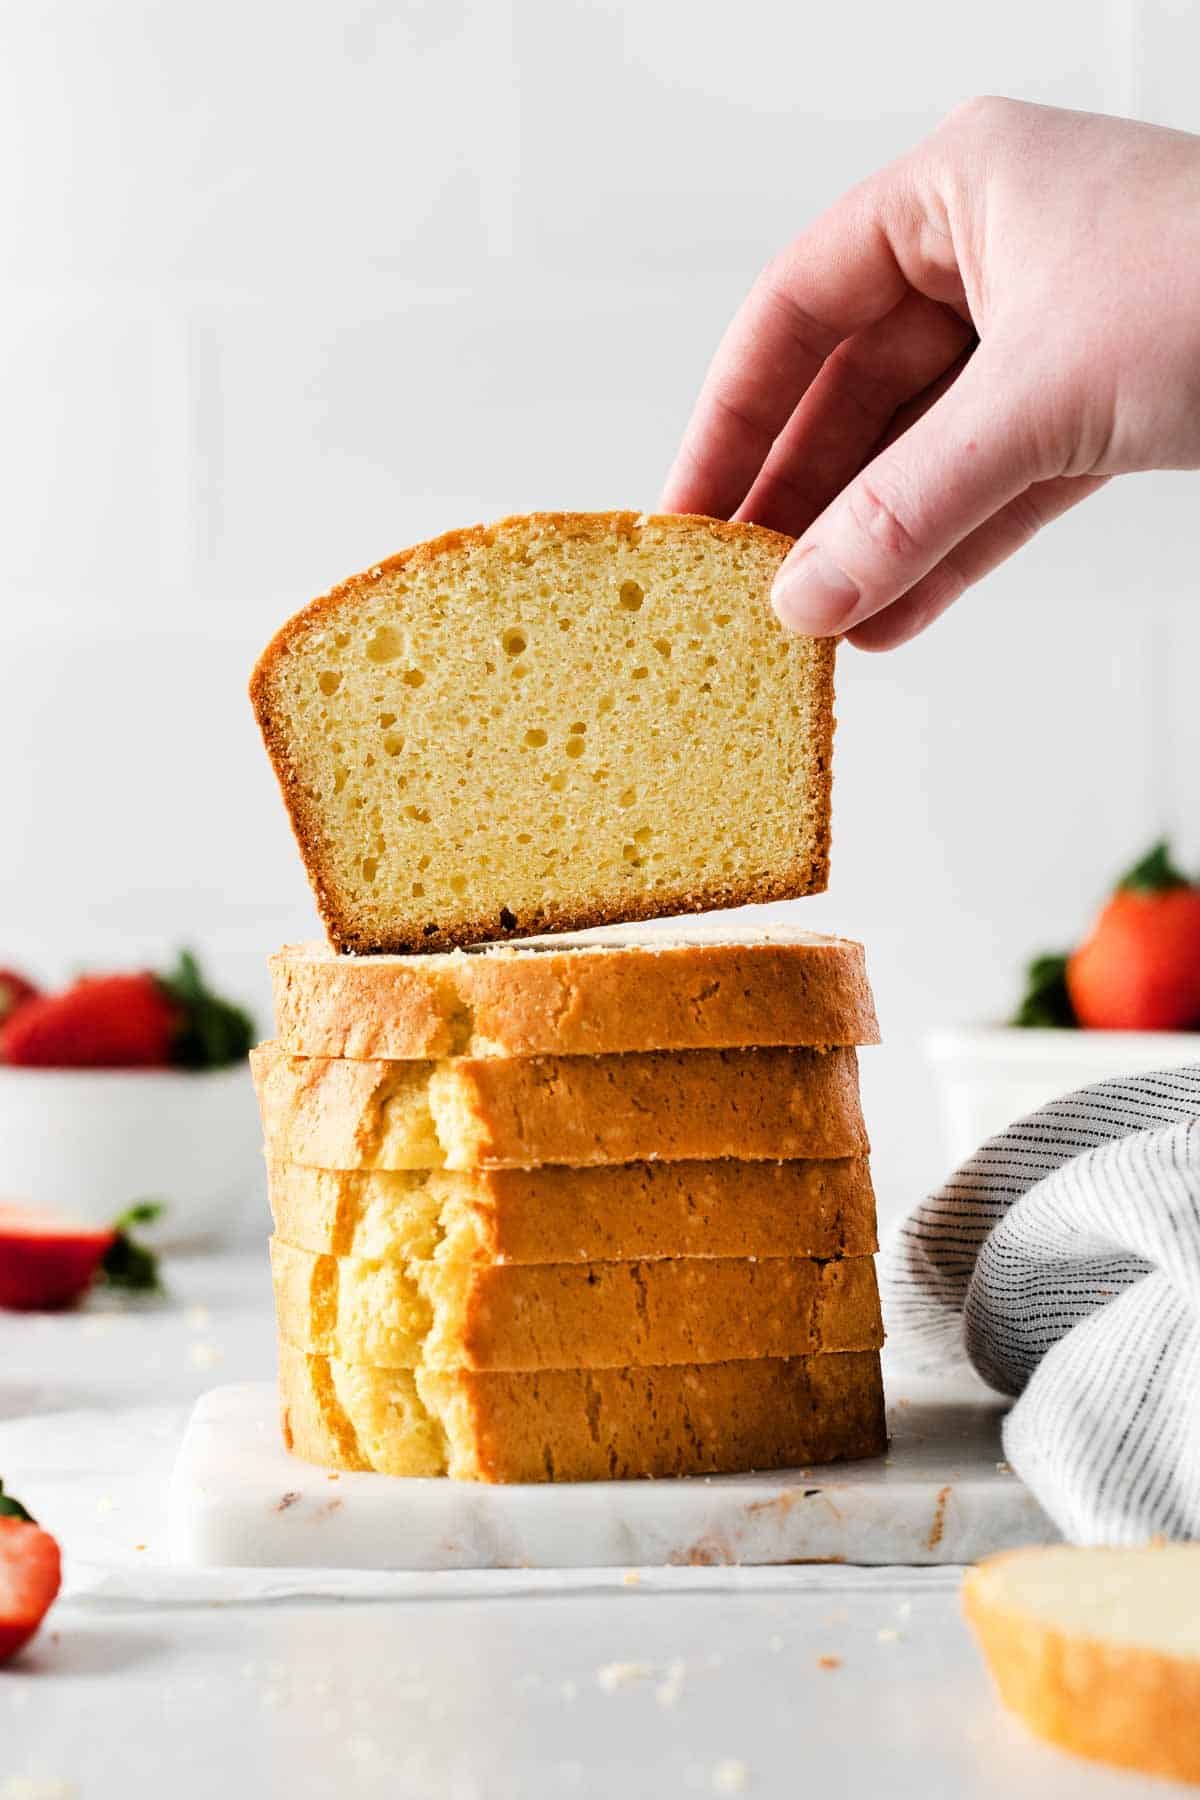 Pound cake slices stacked vertically on a table, with a hand picking up a piece